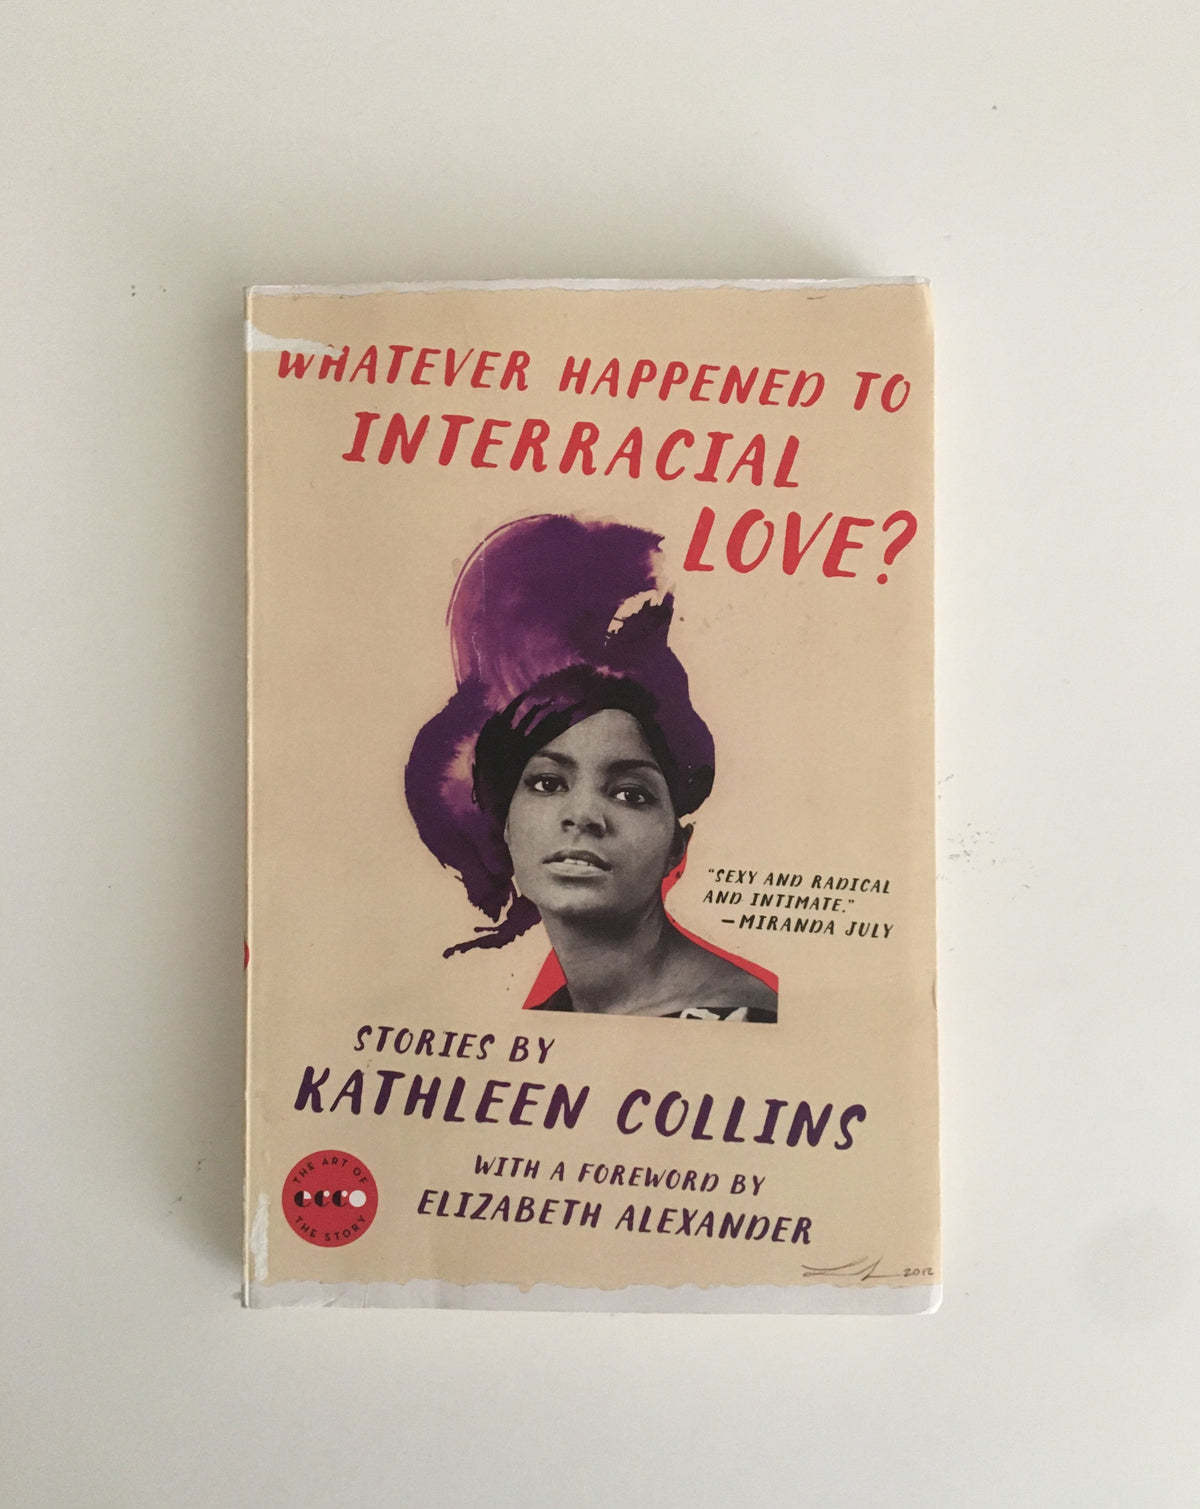 Whatever Happened to Interracial Love? by Kathleen Collins